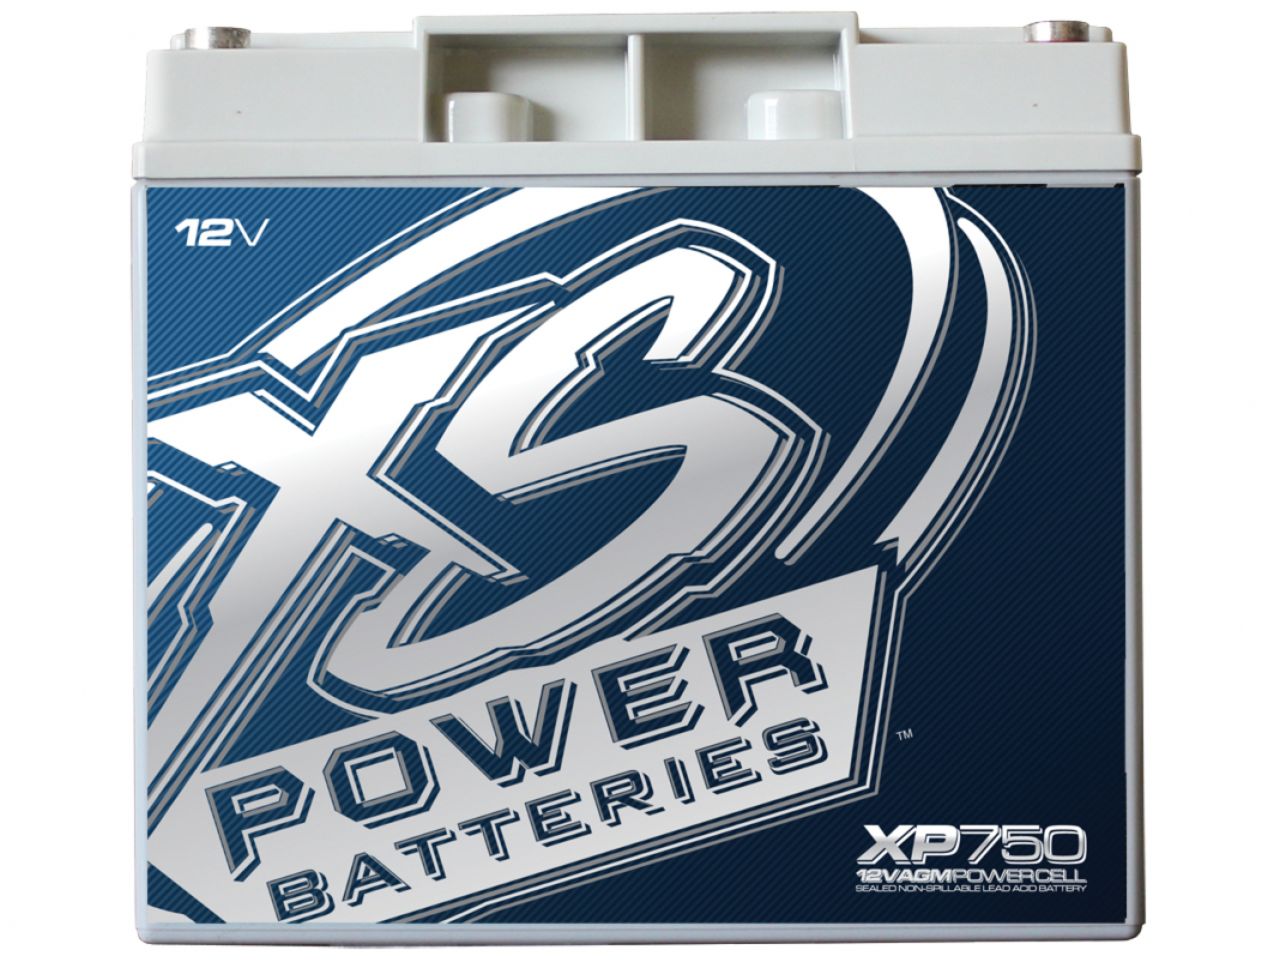 XS Power 12V AGM Battery, Max Amps 750A, Ah: 22,  RC: 28